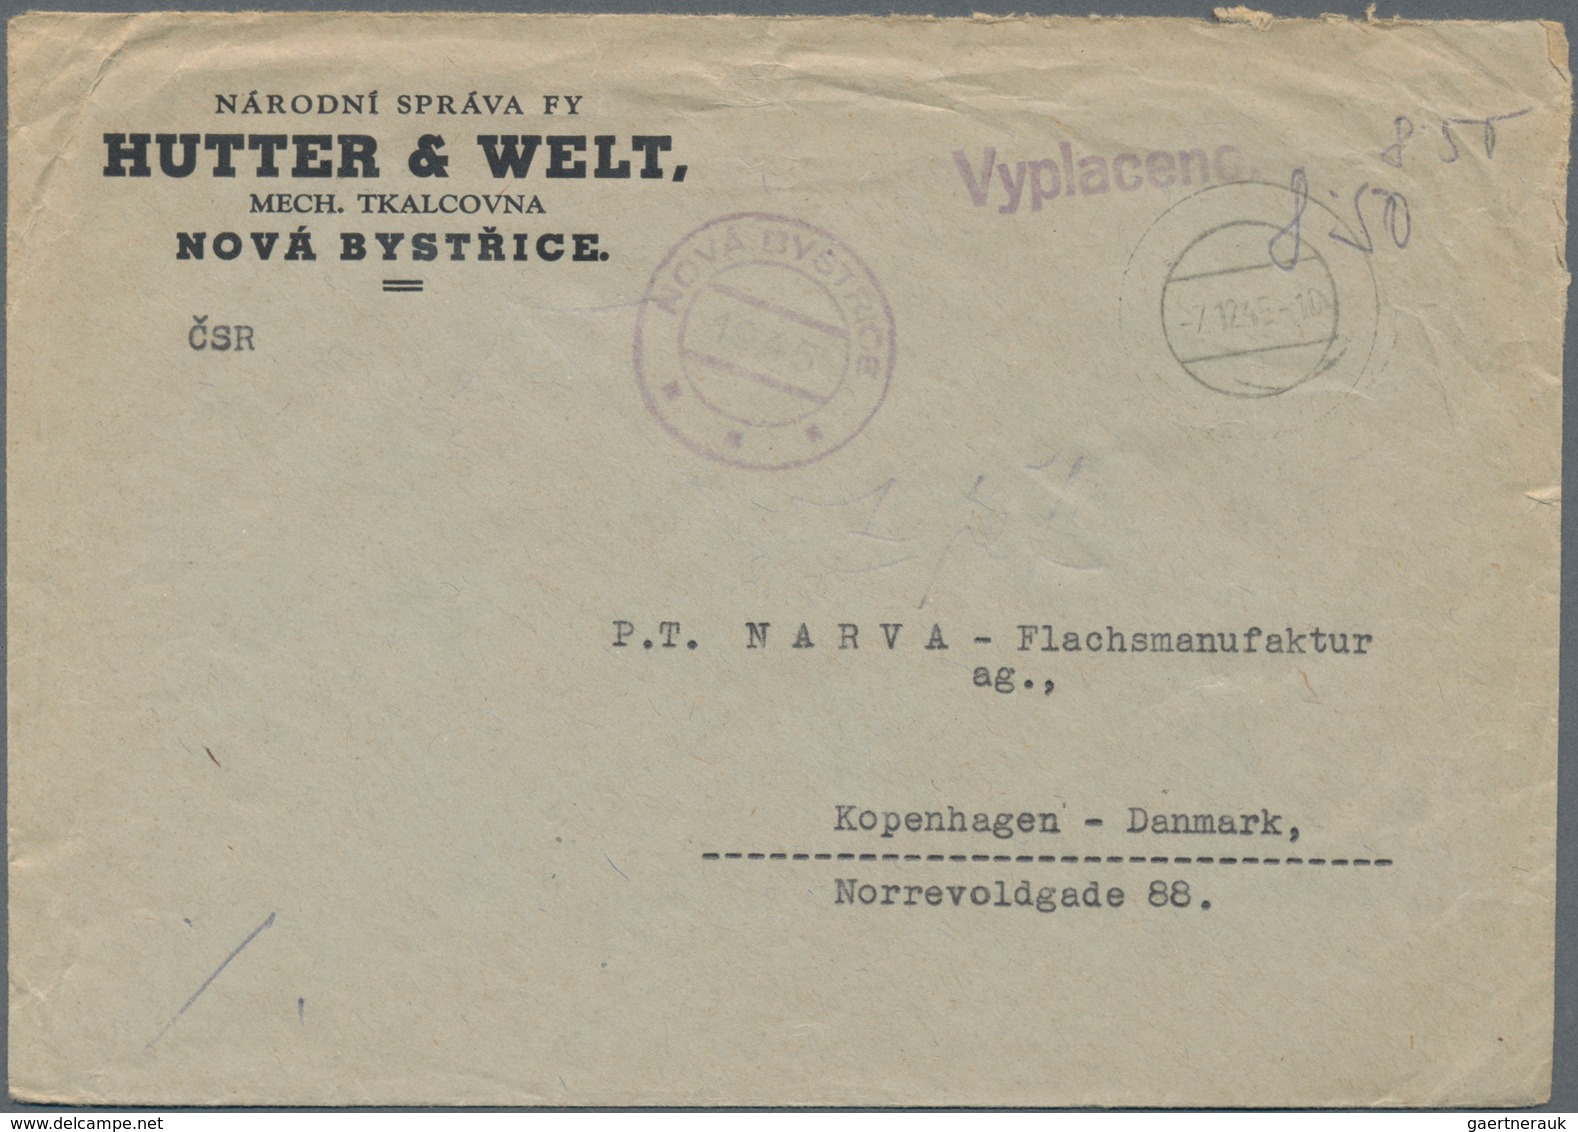 Tschechoslowakei: 1919/86, holding of ca. 150 letters, cards, picture postcards, a franked consignme